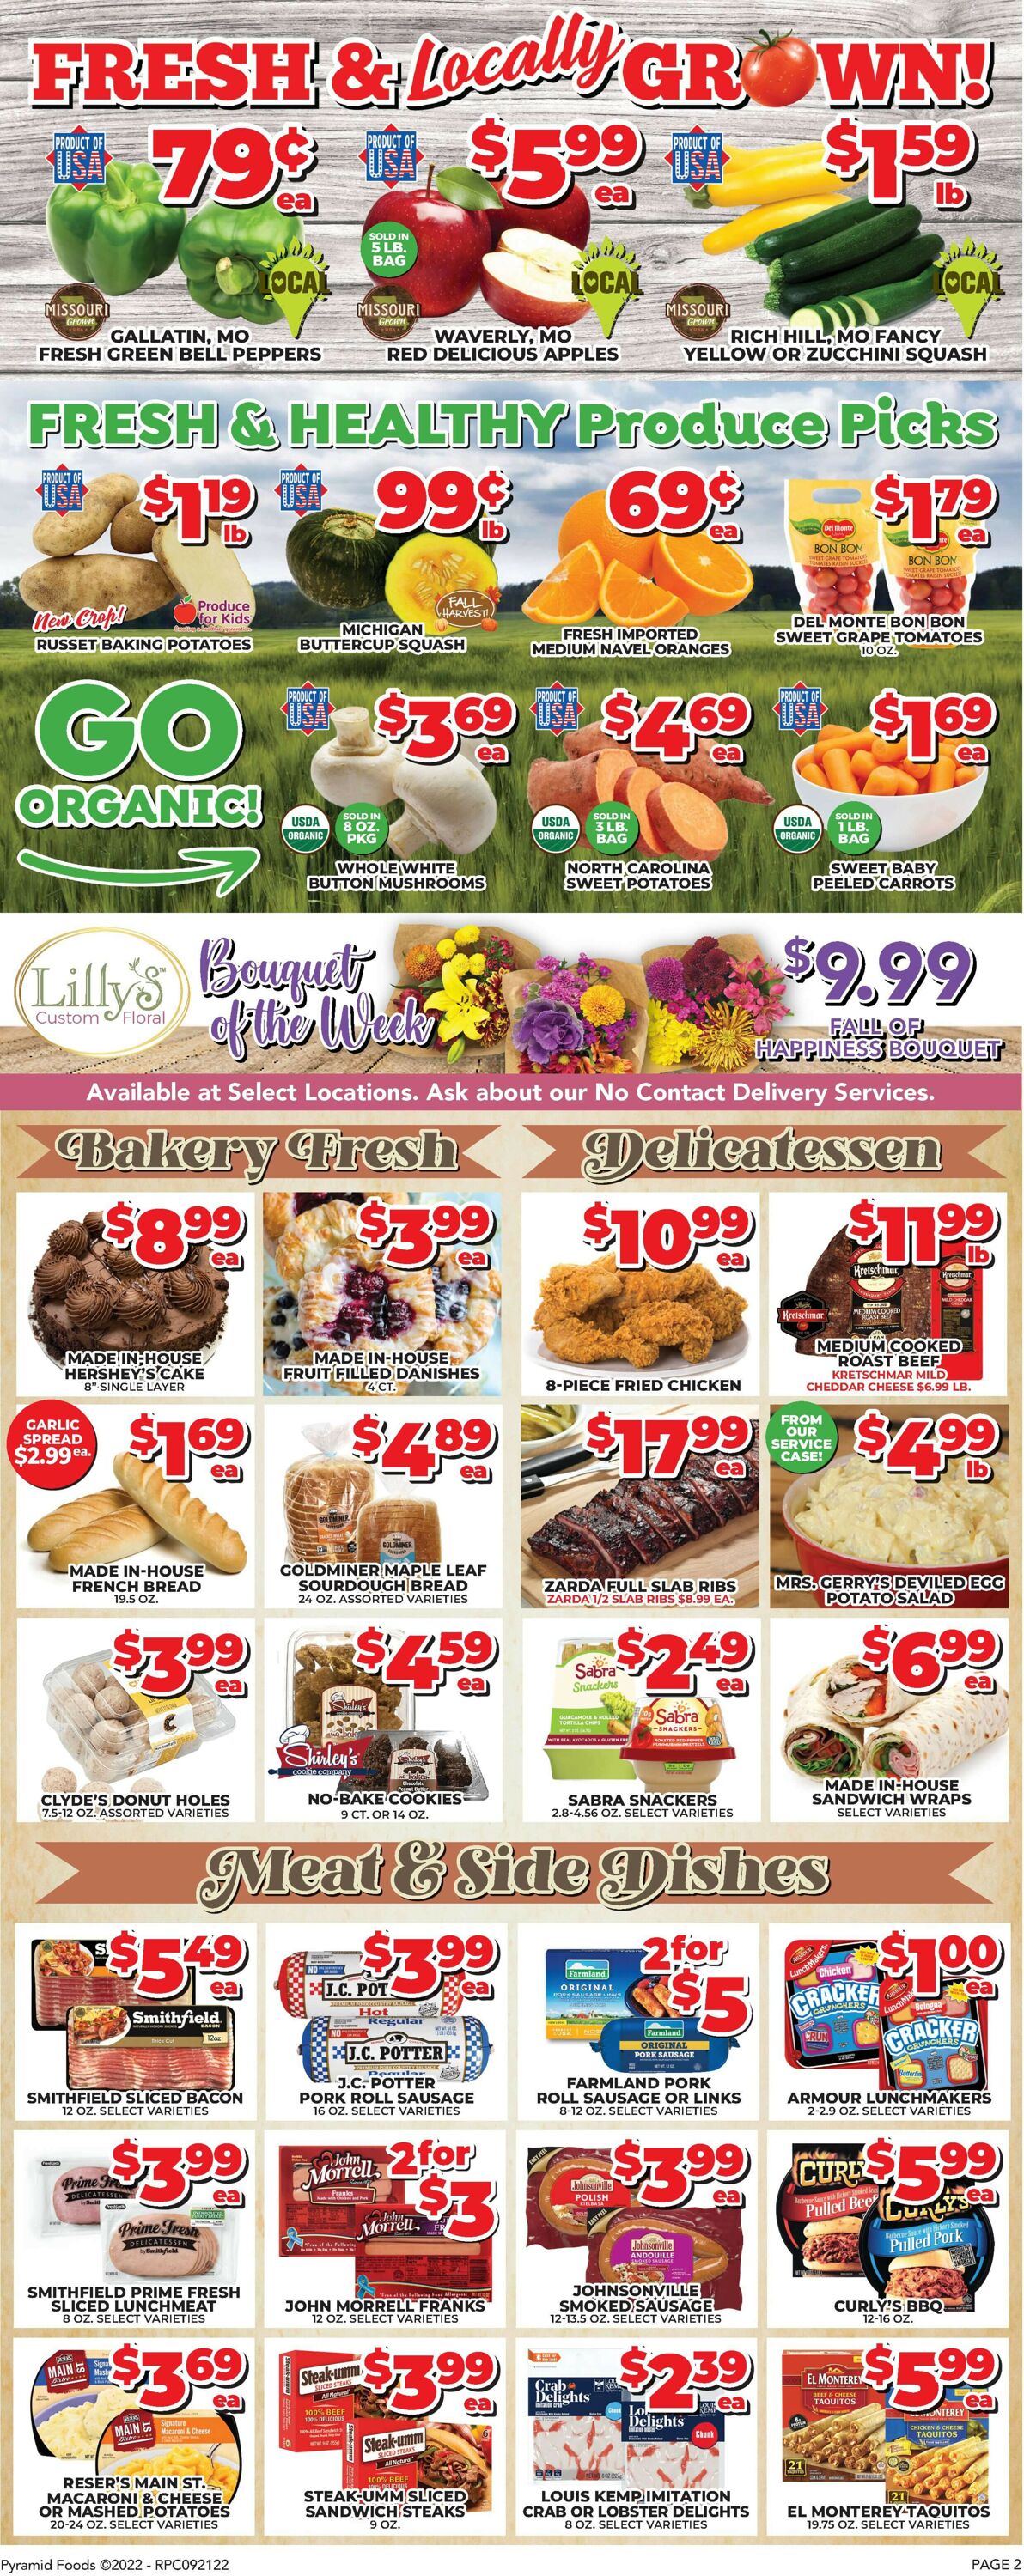 Price Cutter Weekly Ad Circular - valid 09/21-09/27/2022 (Page 2)